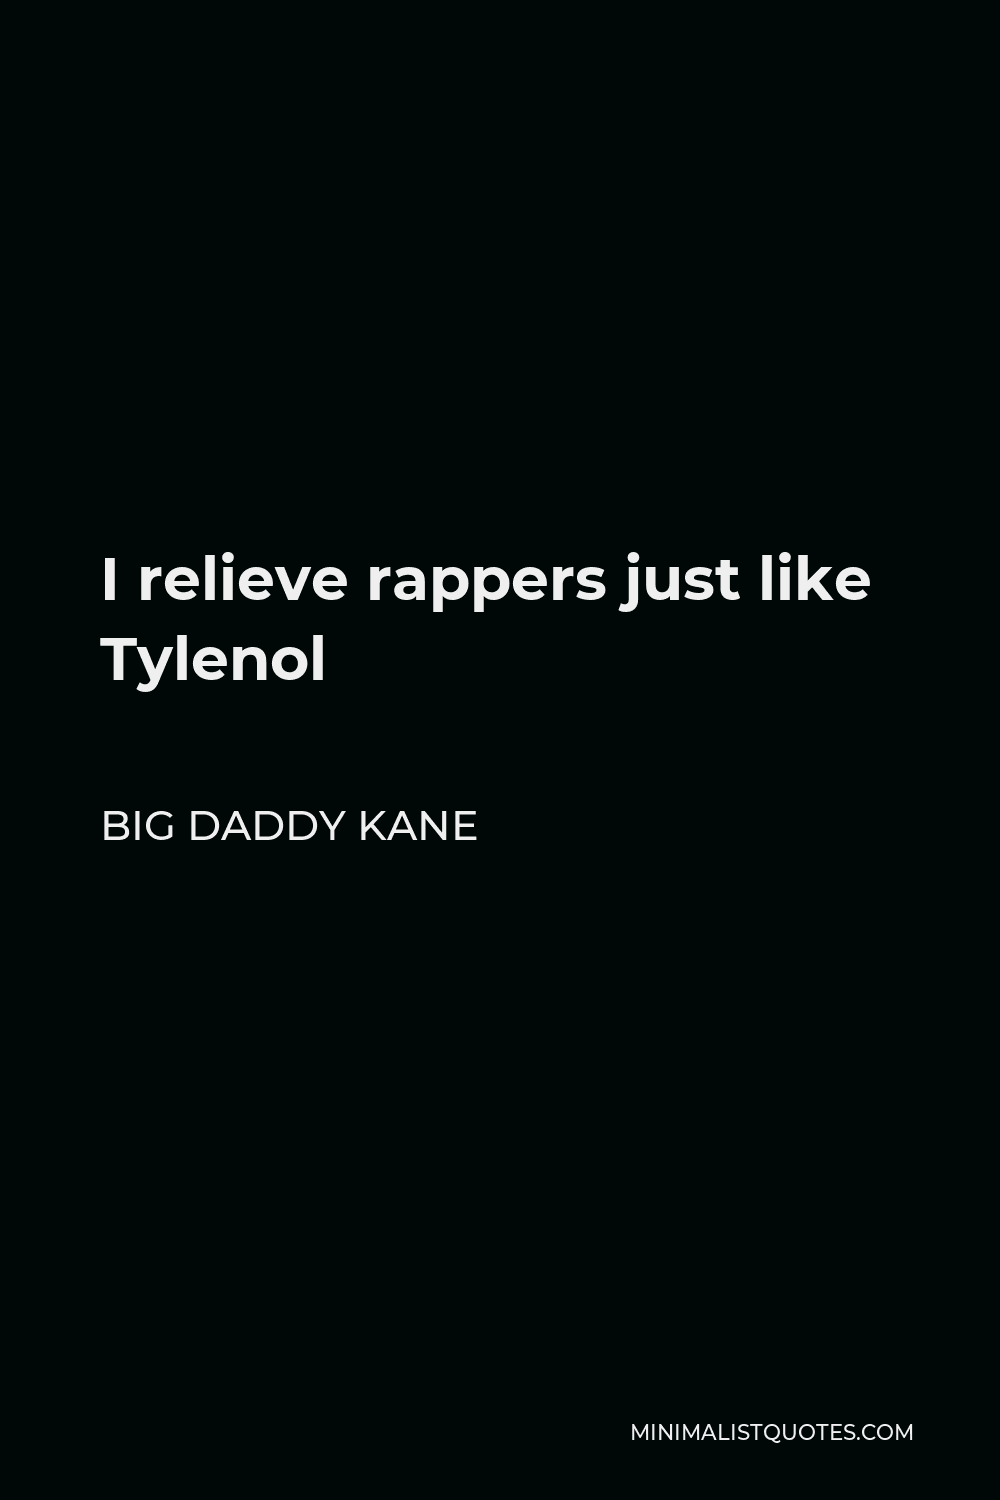 Big Daddy Kane Quote - I relieve rappers just like Tylenol